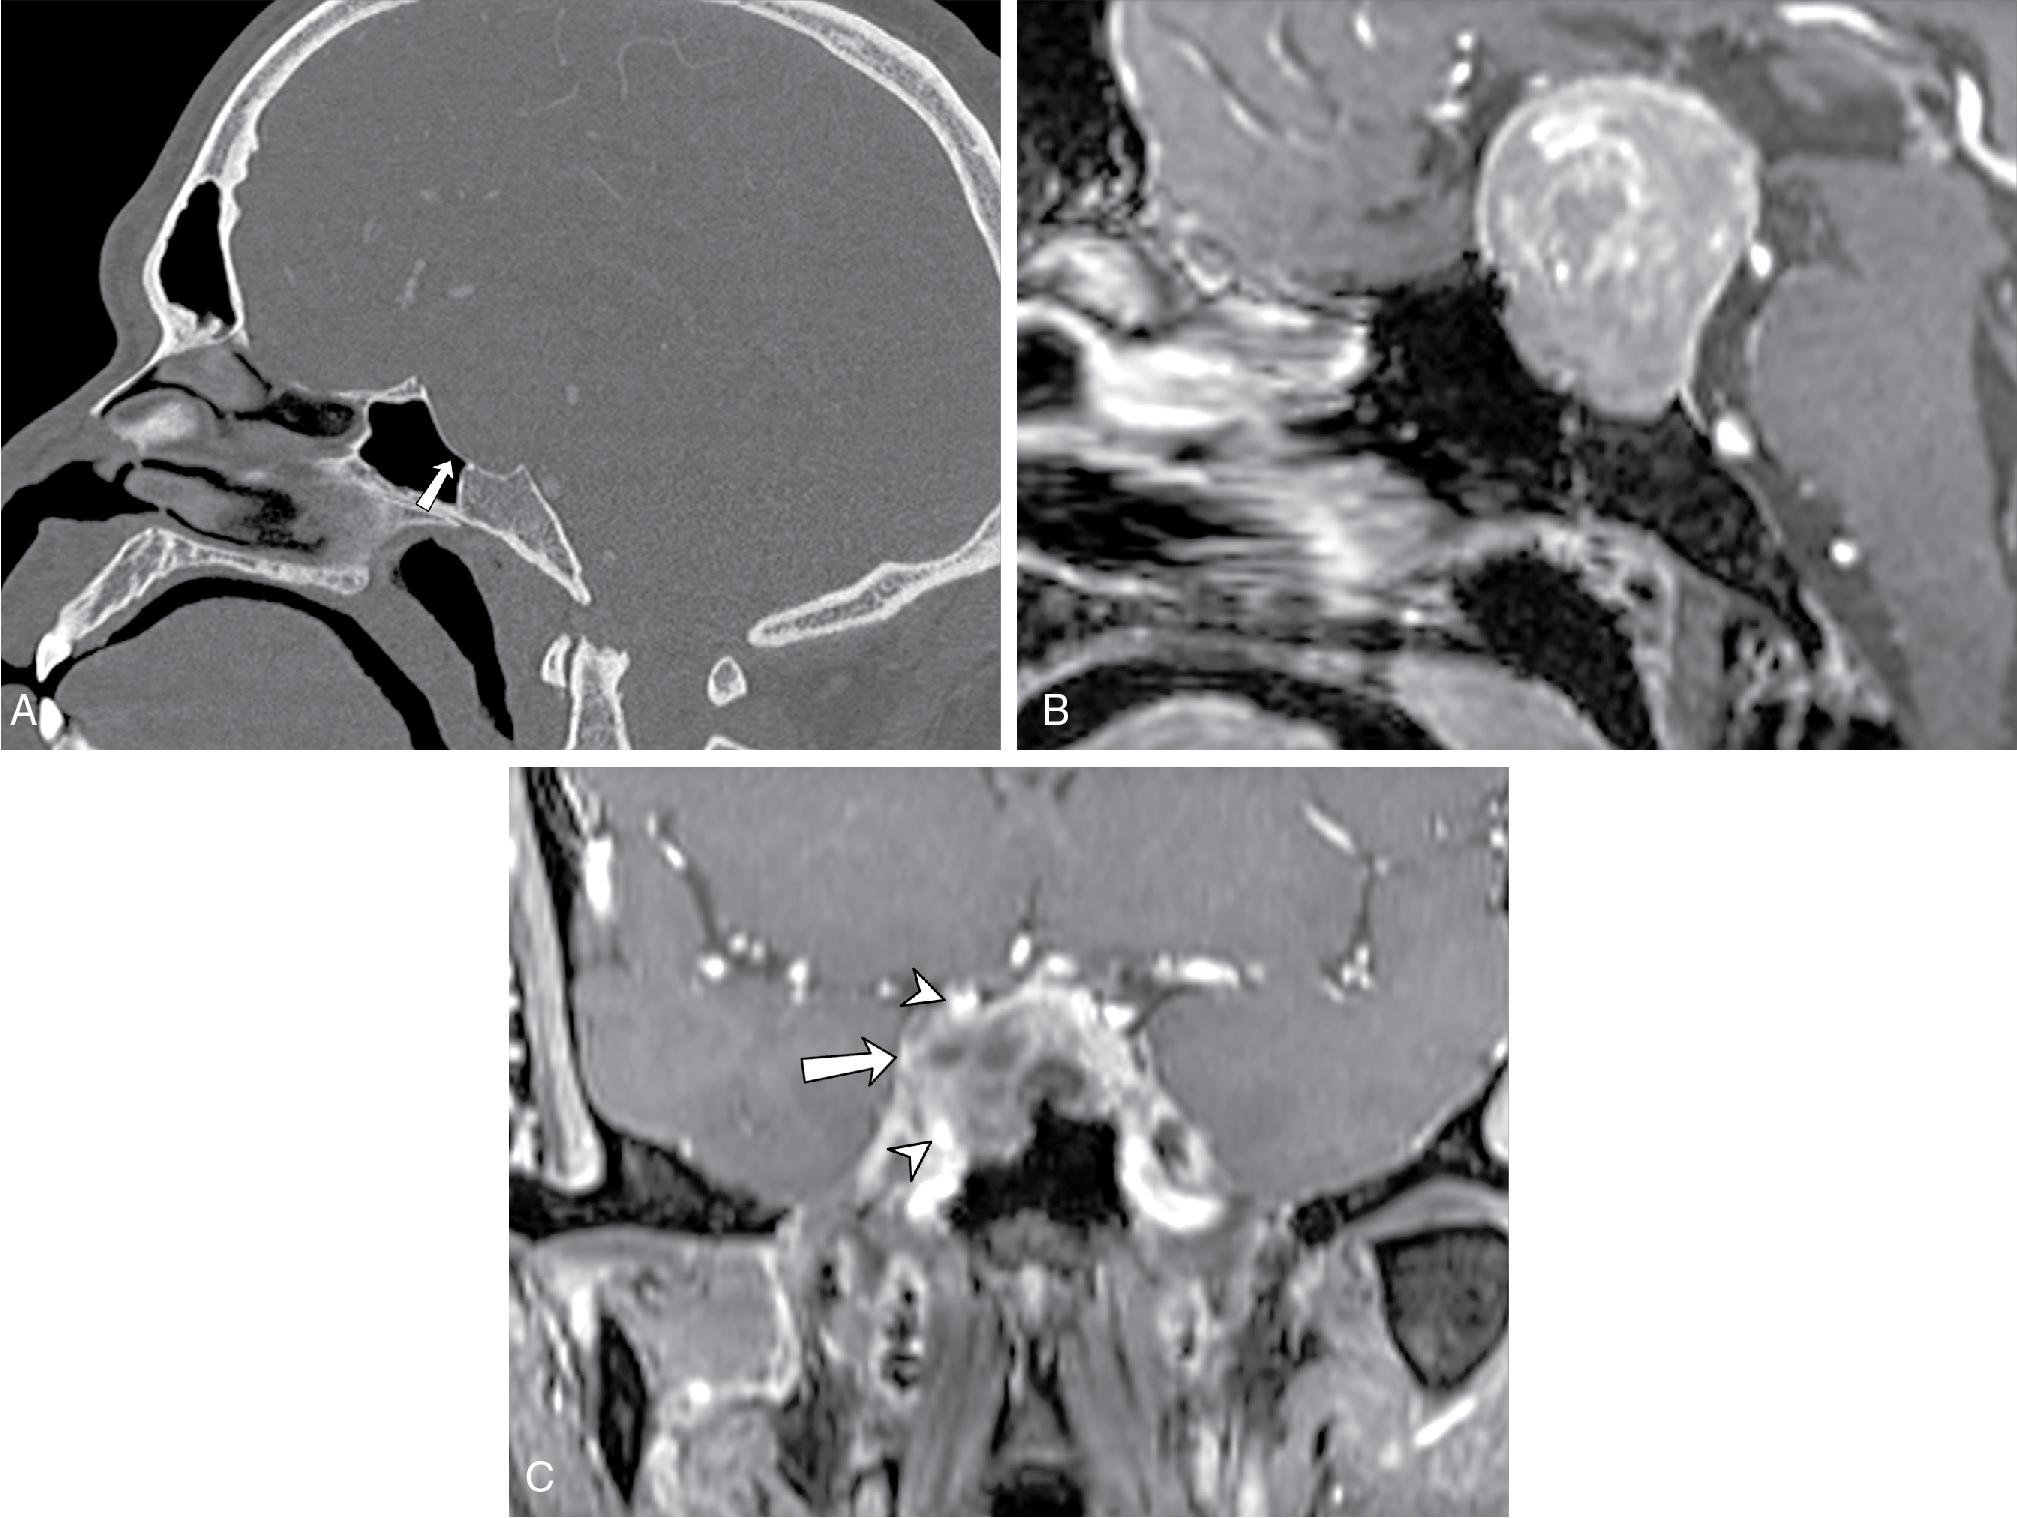 Fig. 27.3, Pituitary macroadenomas. A, Sagittal computed tomography image of a patient with a pituitary macroadenoma demonstrates smooth remodeling of the floor of the sella (arrow) . B, Corresponding postcontrast T1-weighted magnetic resonance imaging demonstrates an enhancing lobulated sellar mass with suprasellar extension, in position to compress the optic chiasm. C, Postcontrast T1-weighted image on a different patient with a pituitary macroadenoma demonstrates tumor invasion (arrow) beyond the lateral margin of the right internal carotid artery (arrowheads) indicating that cavernous sinus invasion is very likely.